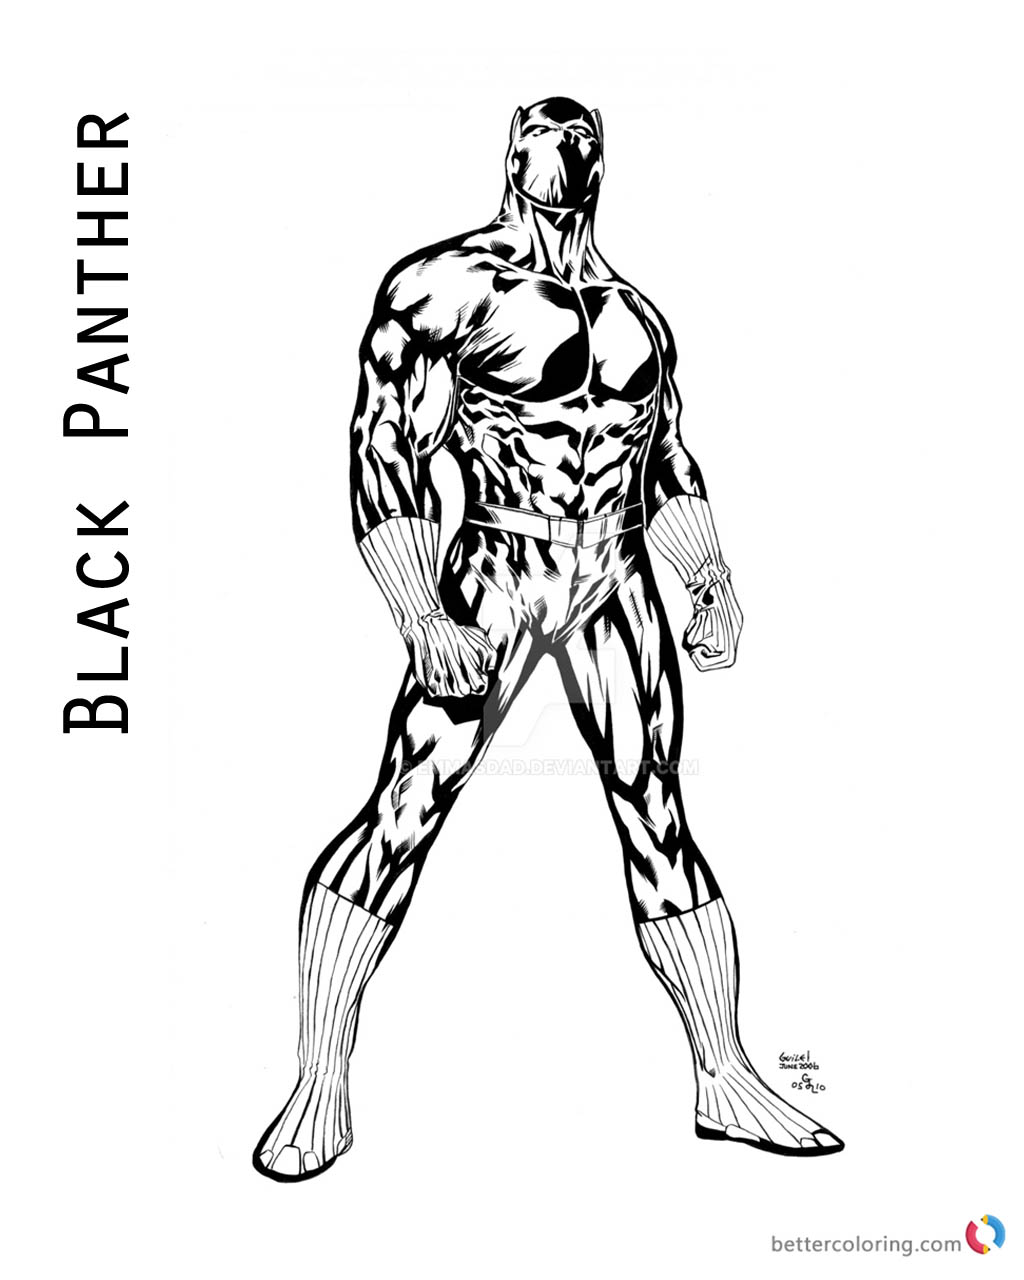 Marvel Moive Black Panther Coloring Page Printable